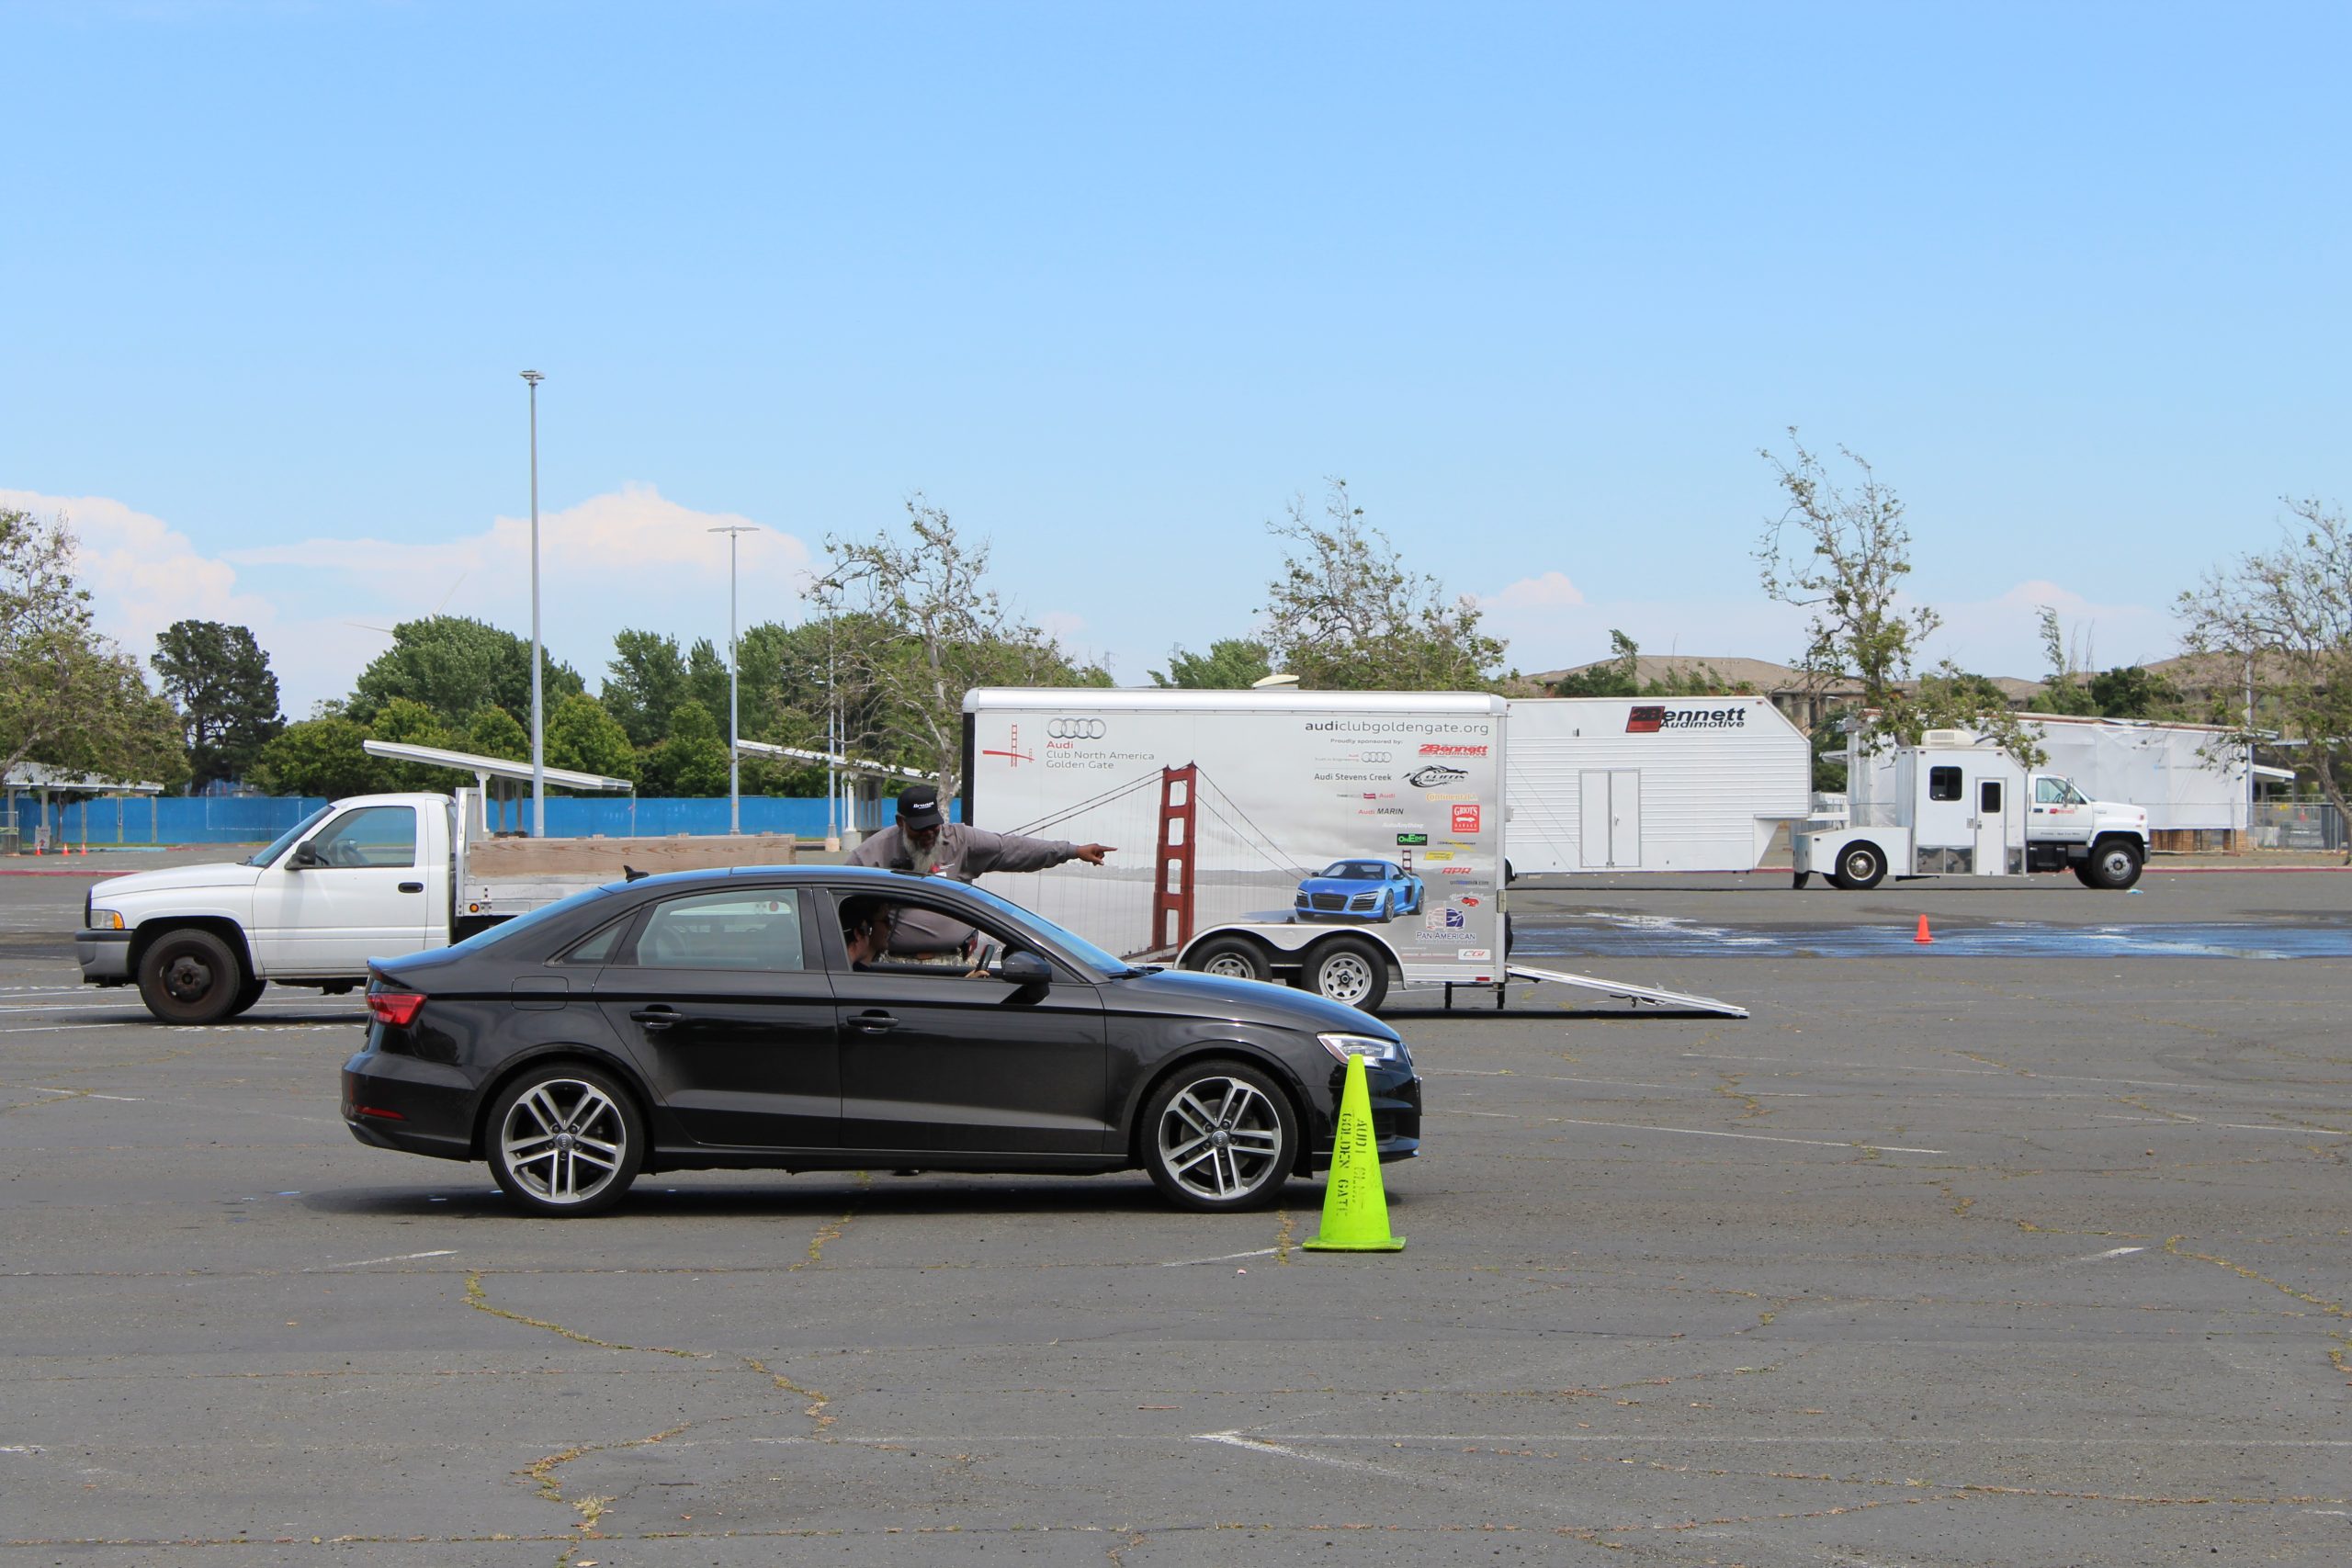 Audi Club Golden Gate: North Bay Teen Driver Safety Clinic